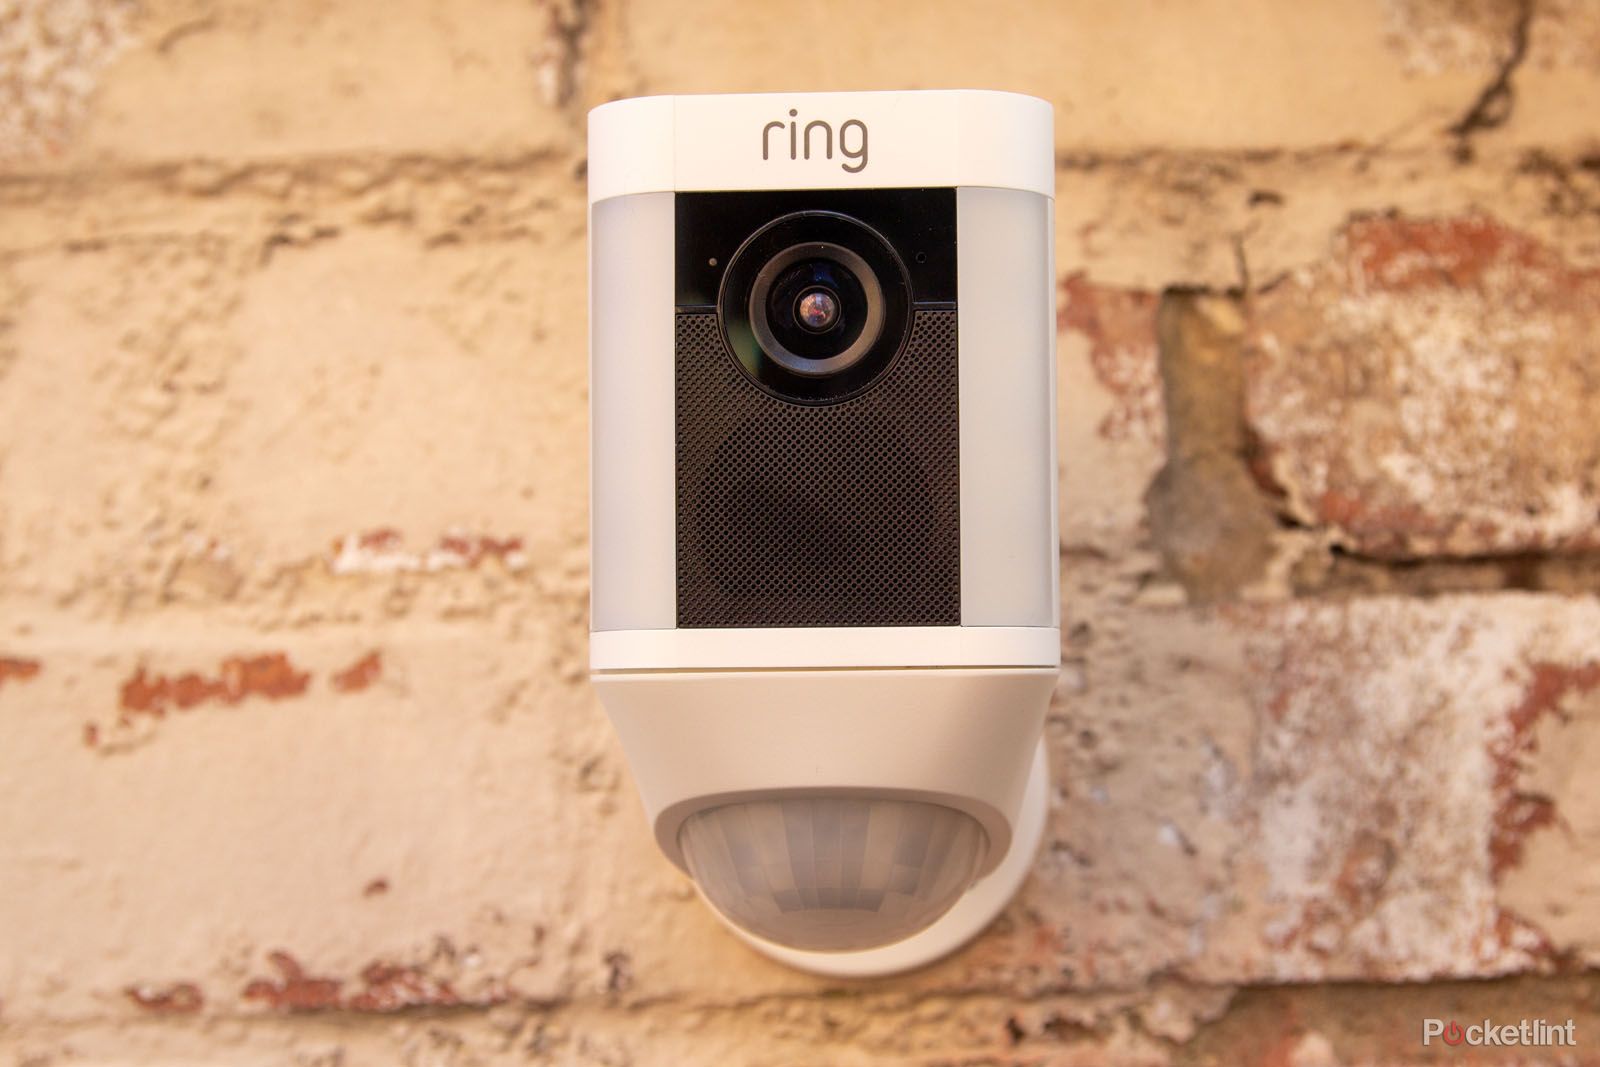 Ring has ambitious potentially worrying facial recognition plans image 1